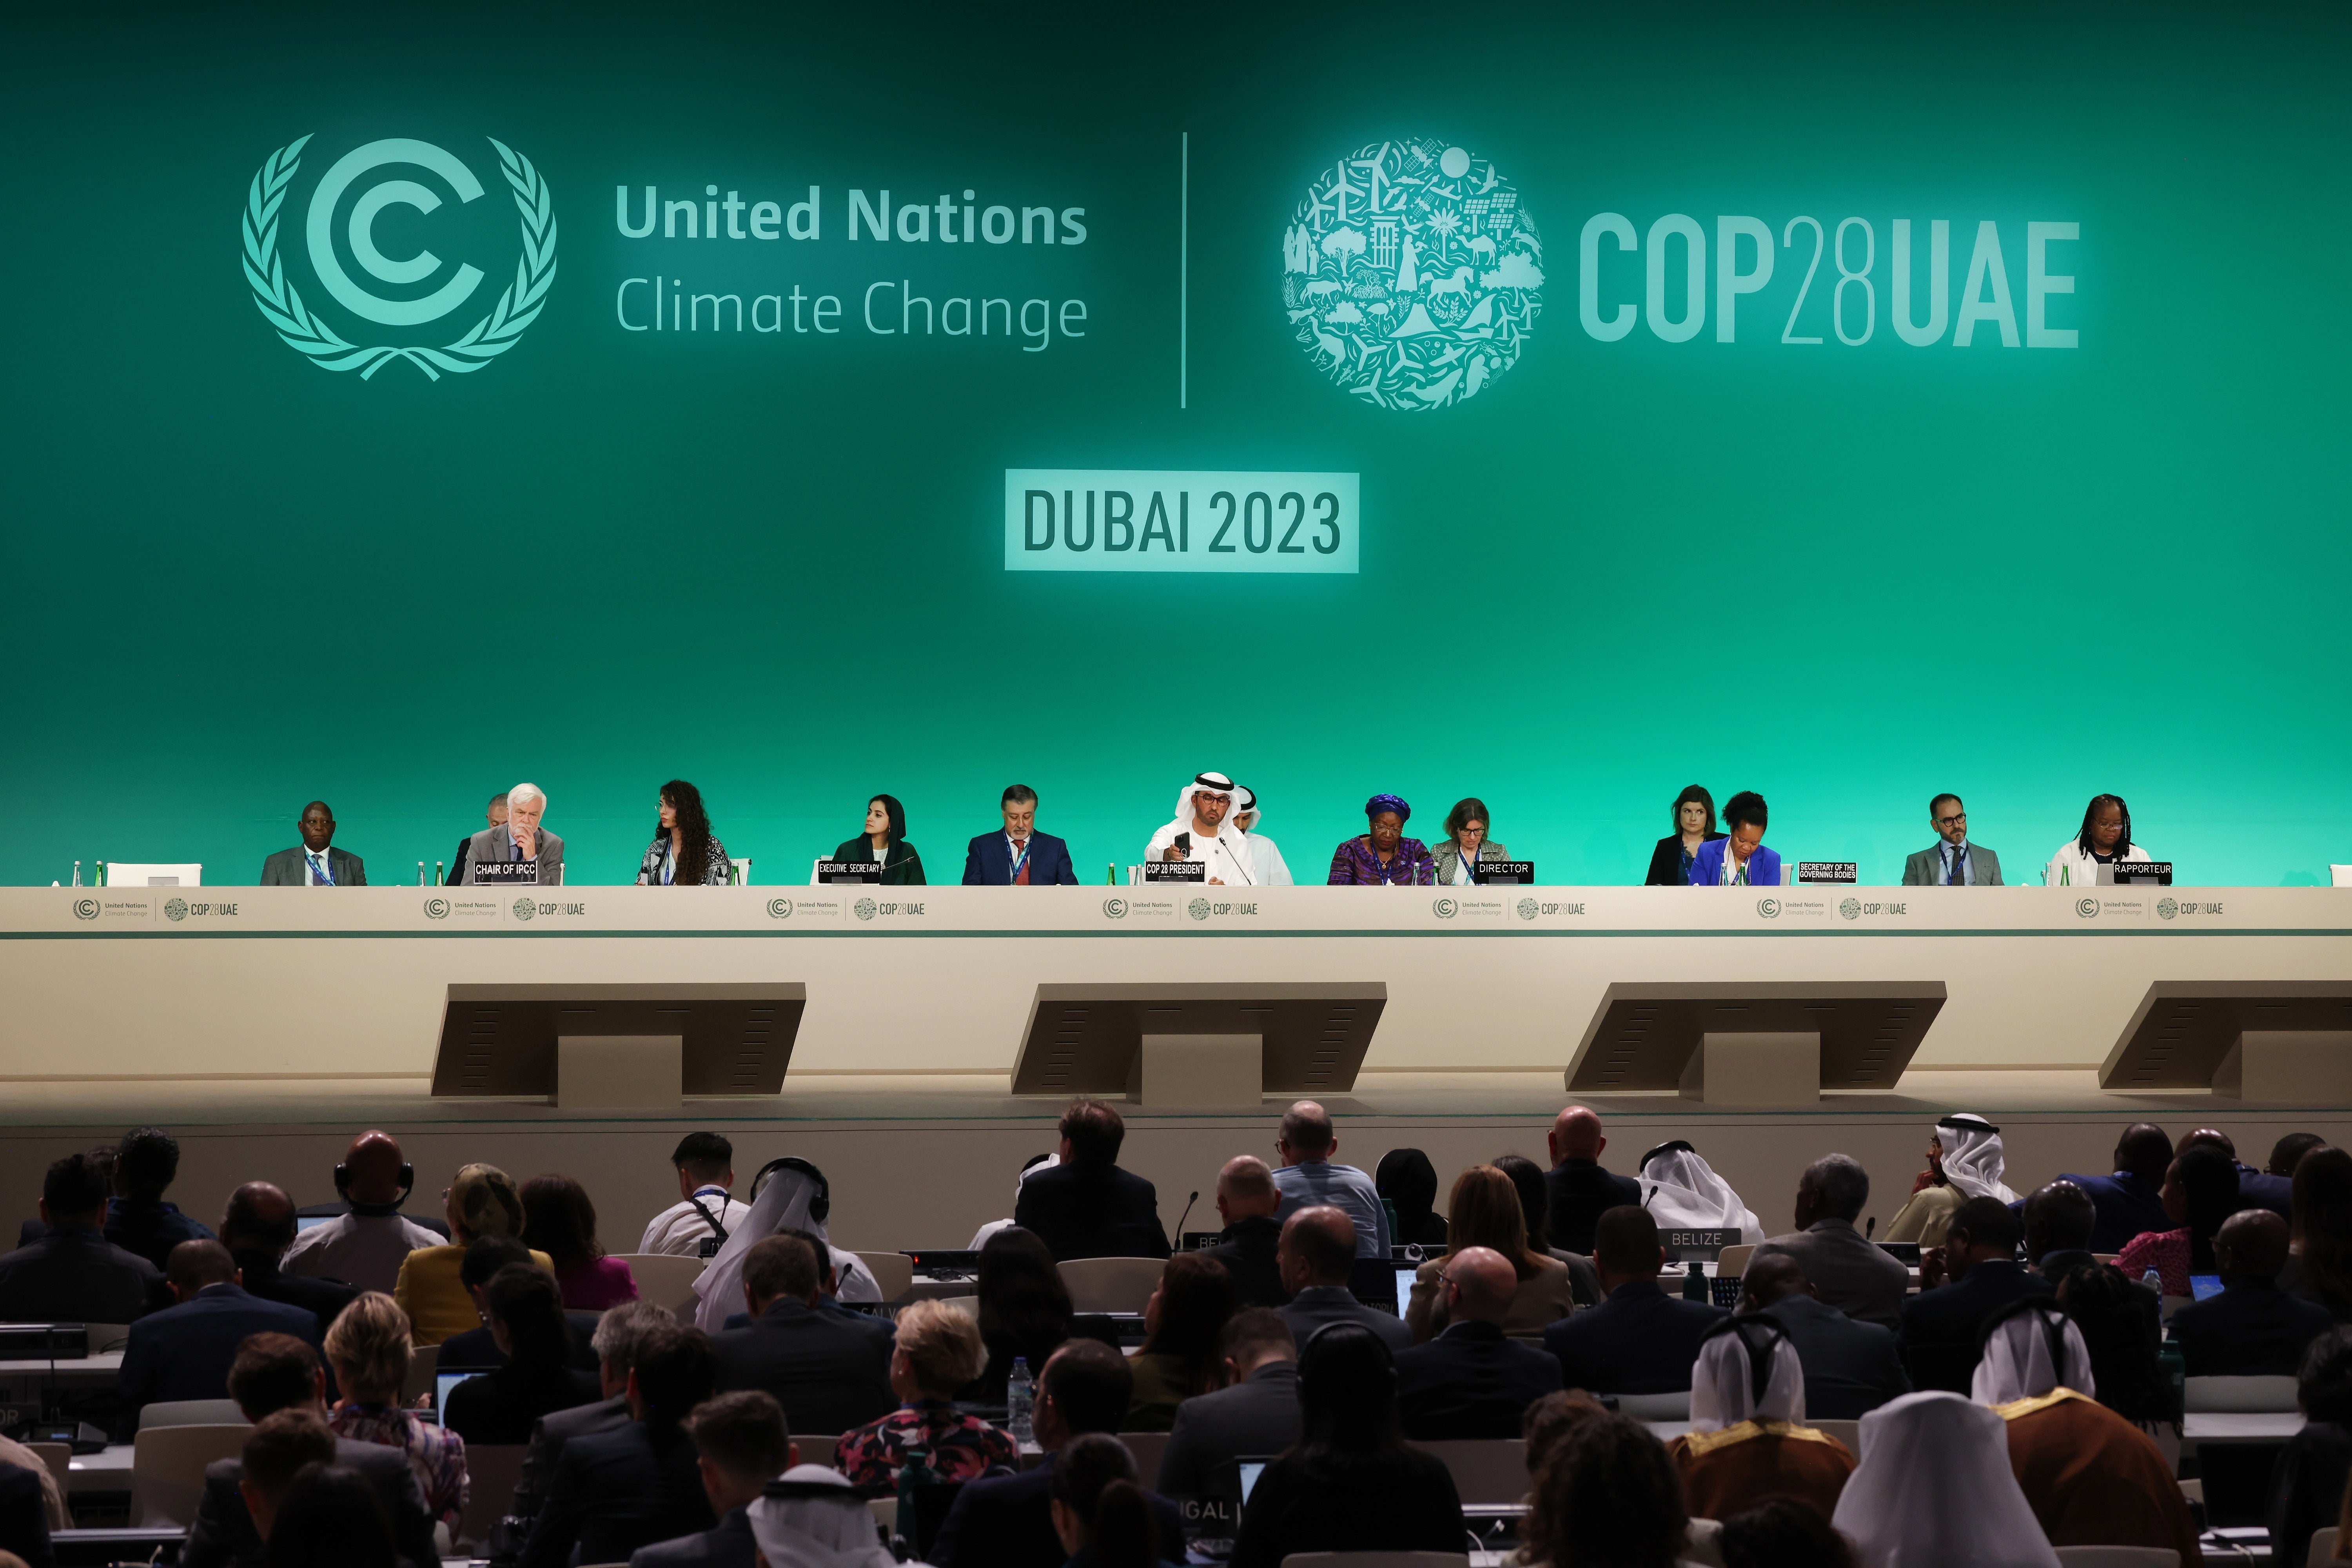 Your Guide to the COP28 Climate Meeting in Dubai